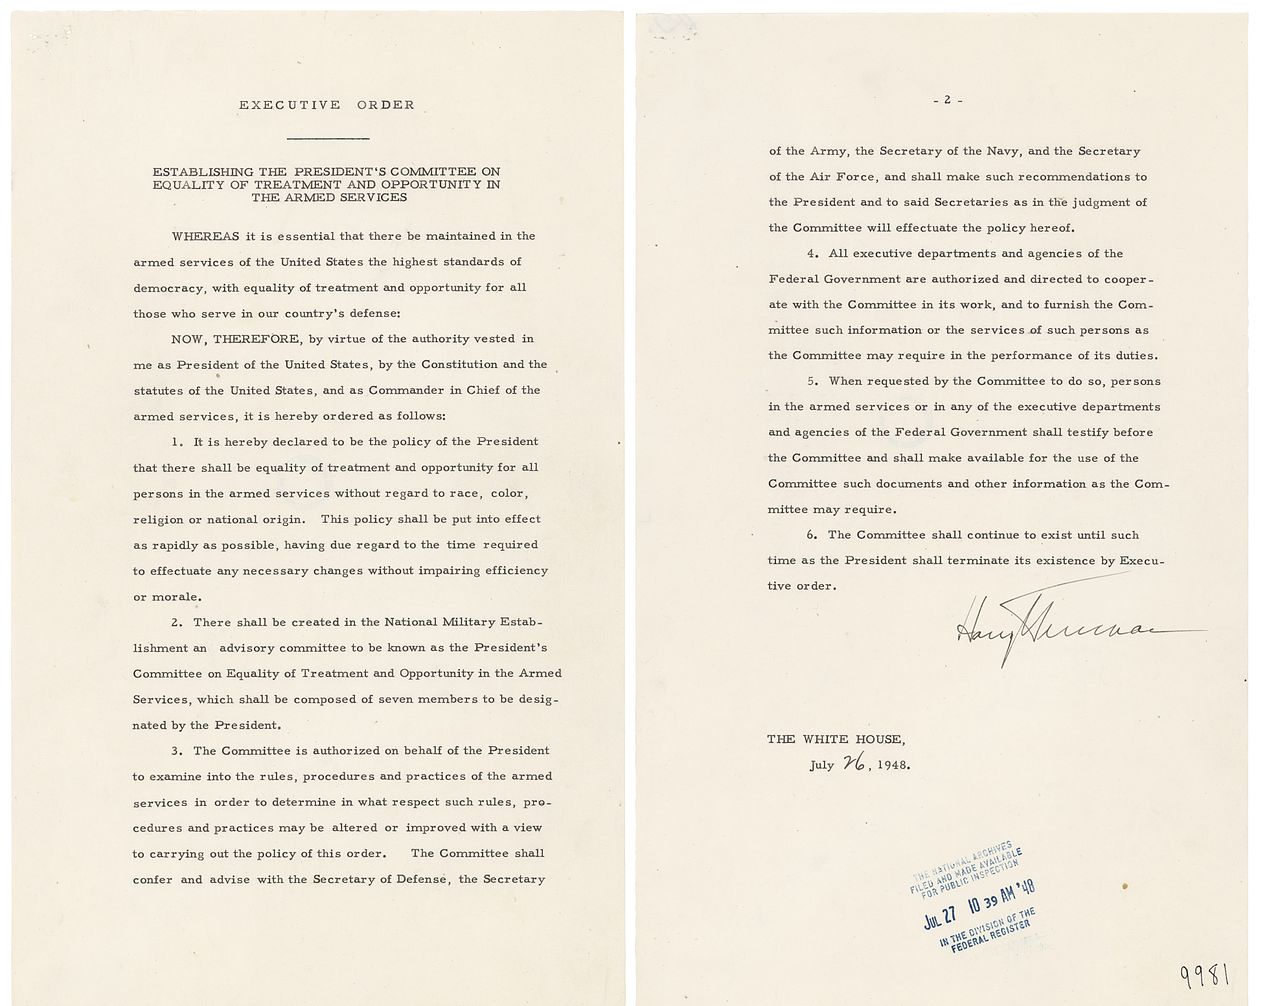 Harry Truman's Executive Order establishing equality of treatment and opportunity in the armed services.